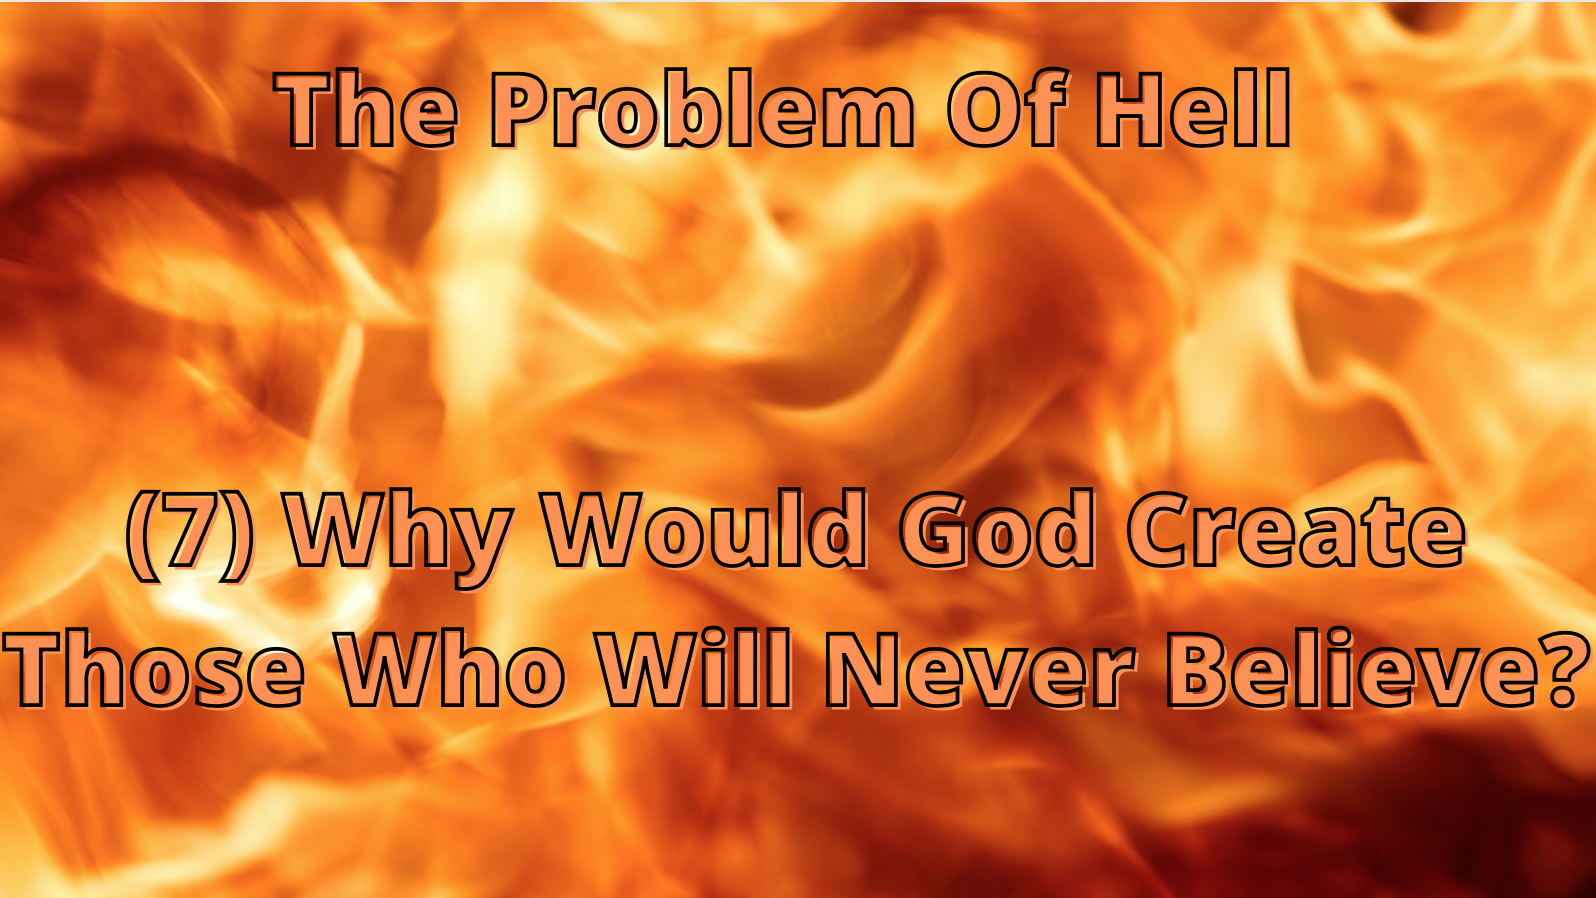 The Problem Of Hell (7) - Why Would God Create Those Who Will Never Believe?